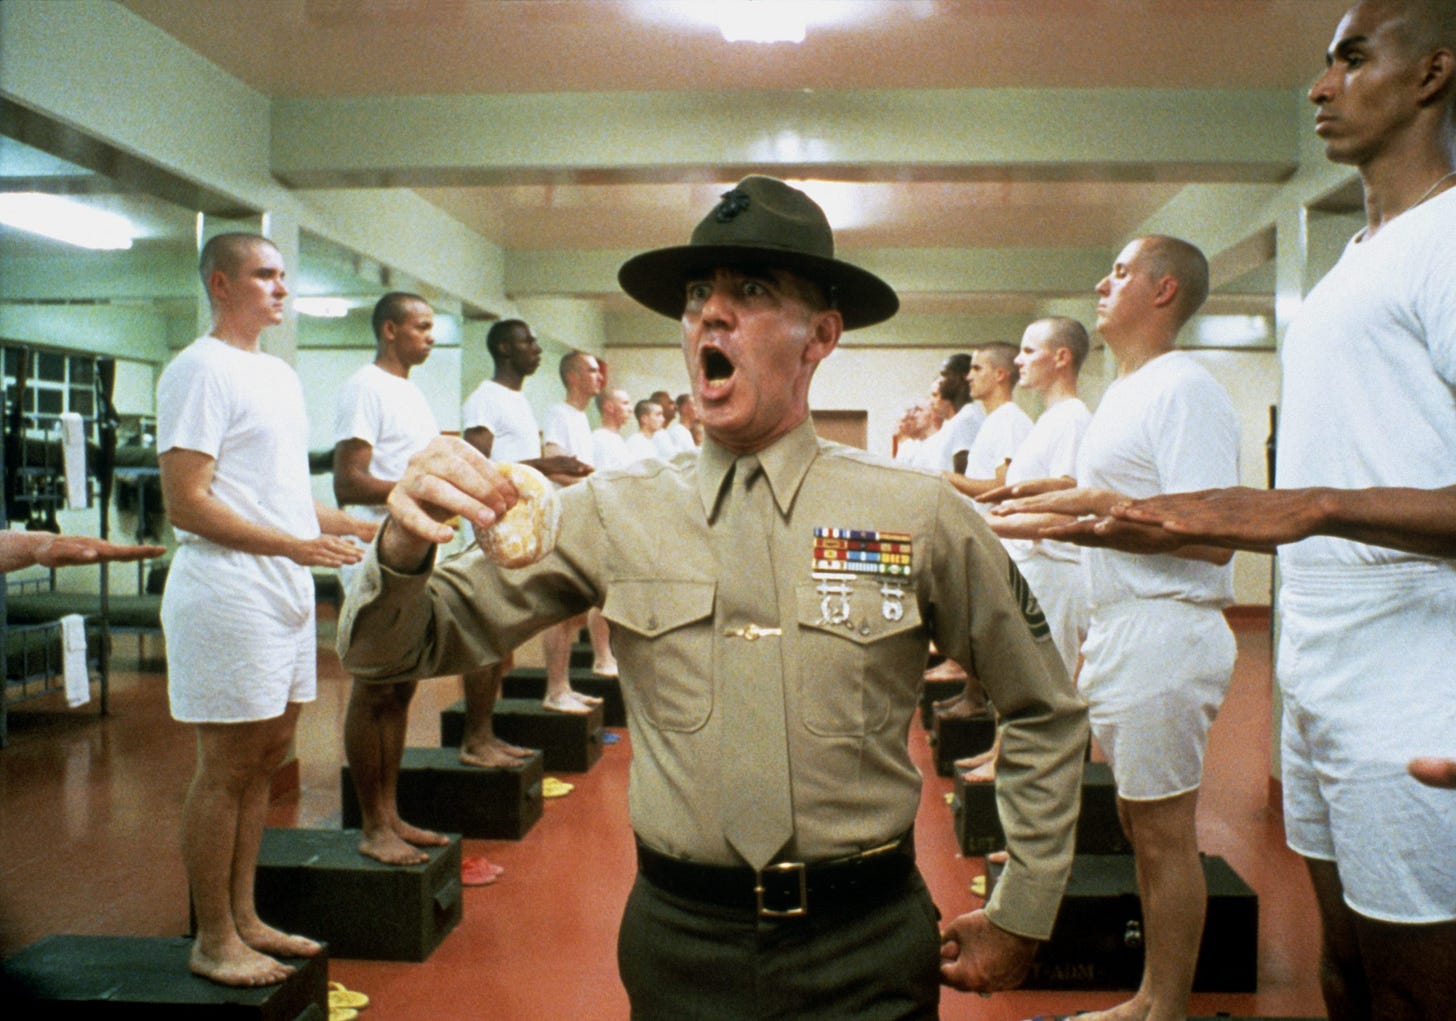 FULL METAL JACKET: CYNIC&#39;S CHOICE - Scraps from the loft